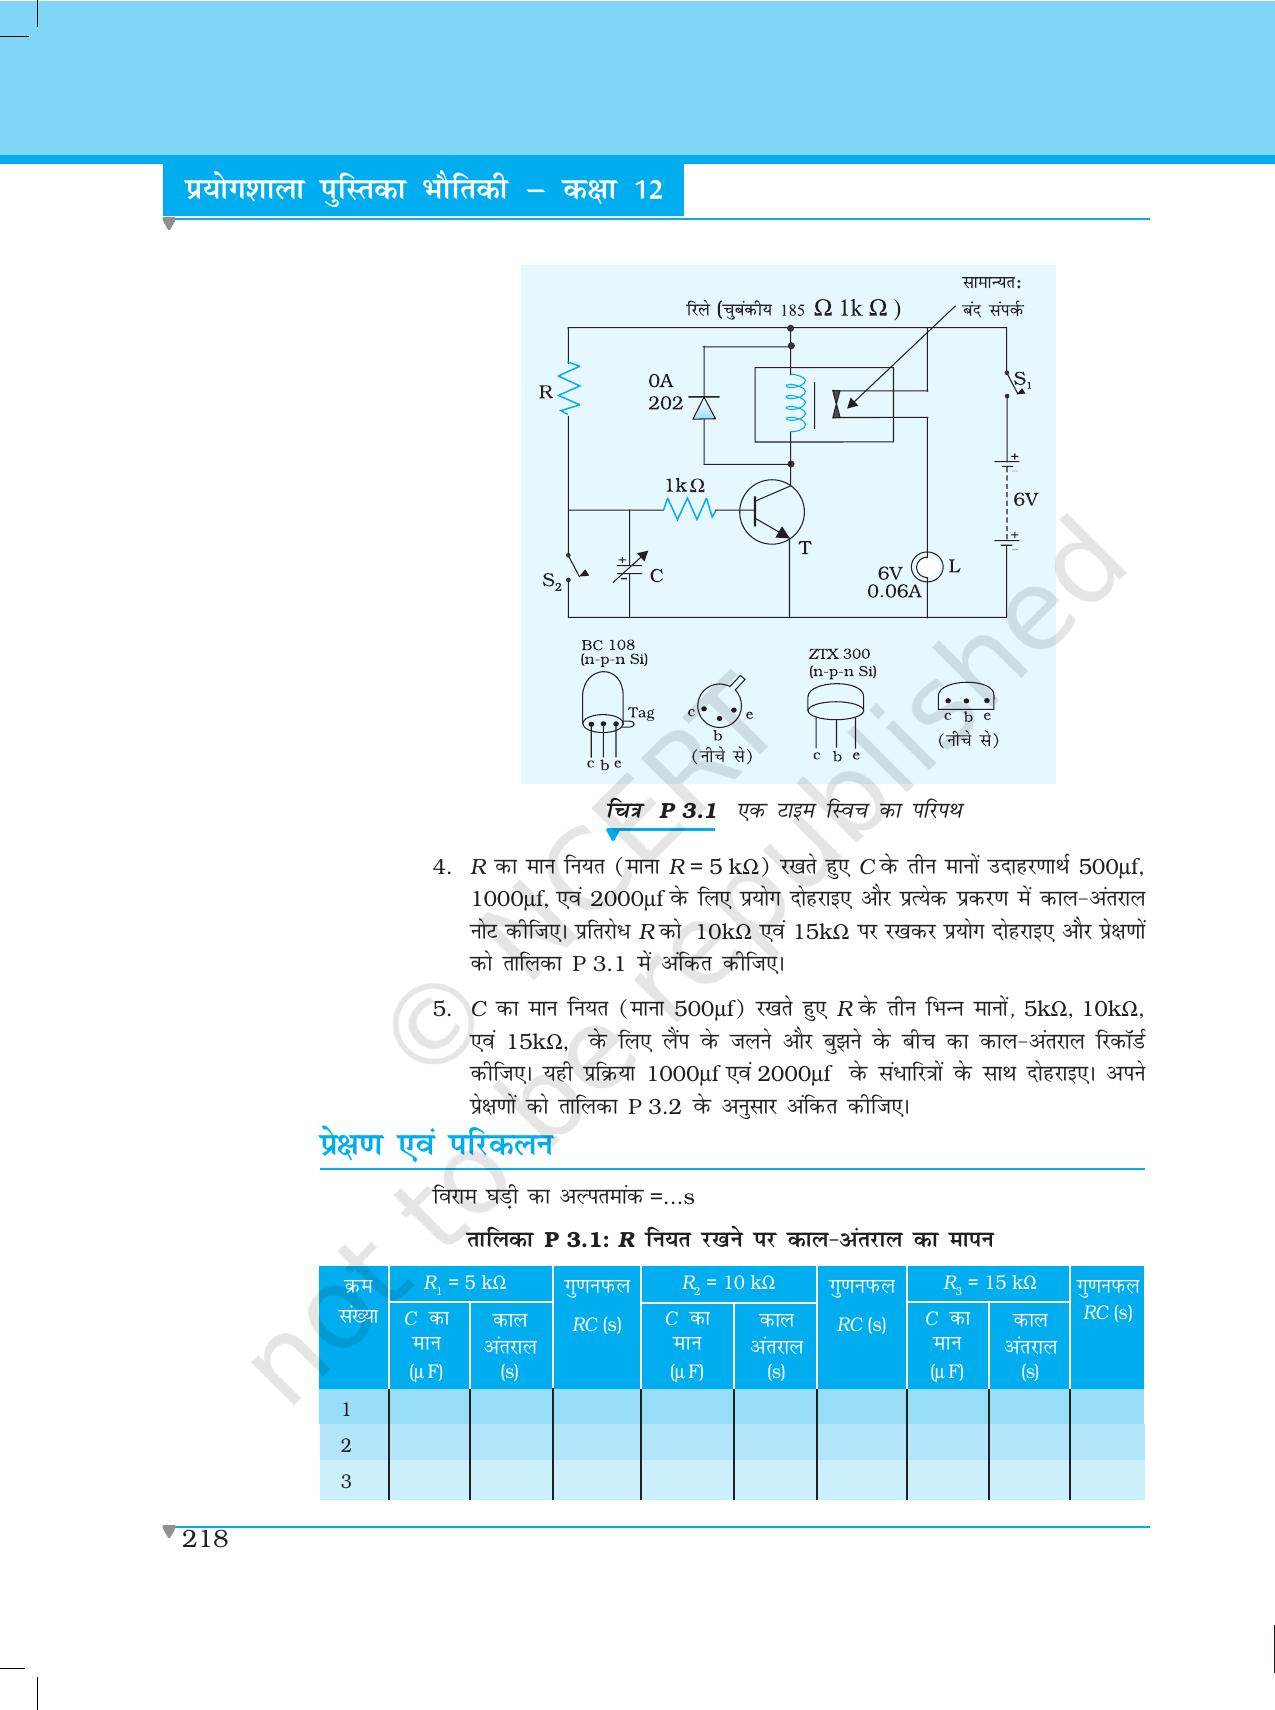 NCERT Laboratory Manuals for Class XII भौतिकी - परियोजना (1 - 7) - Page 12